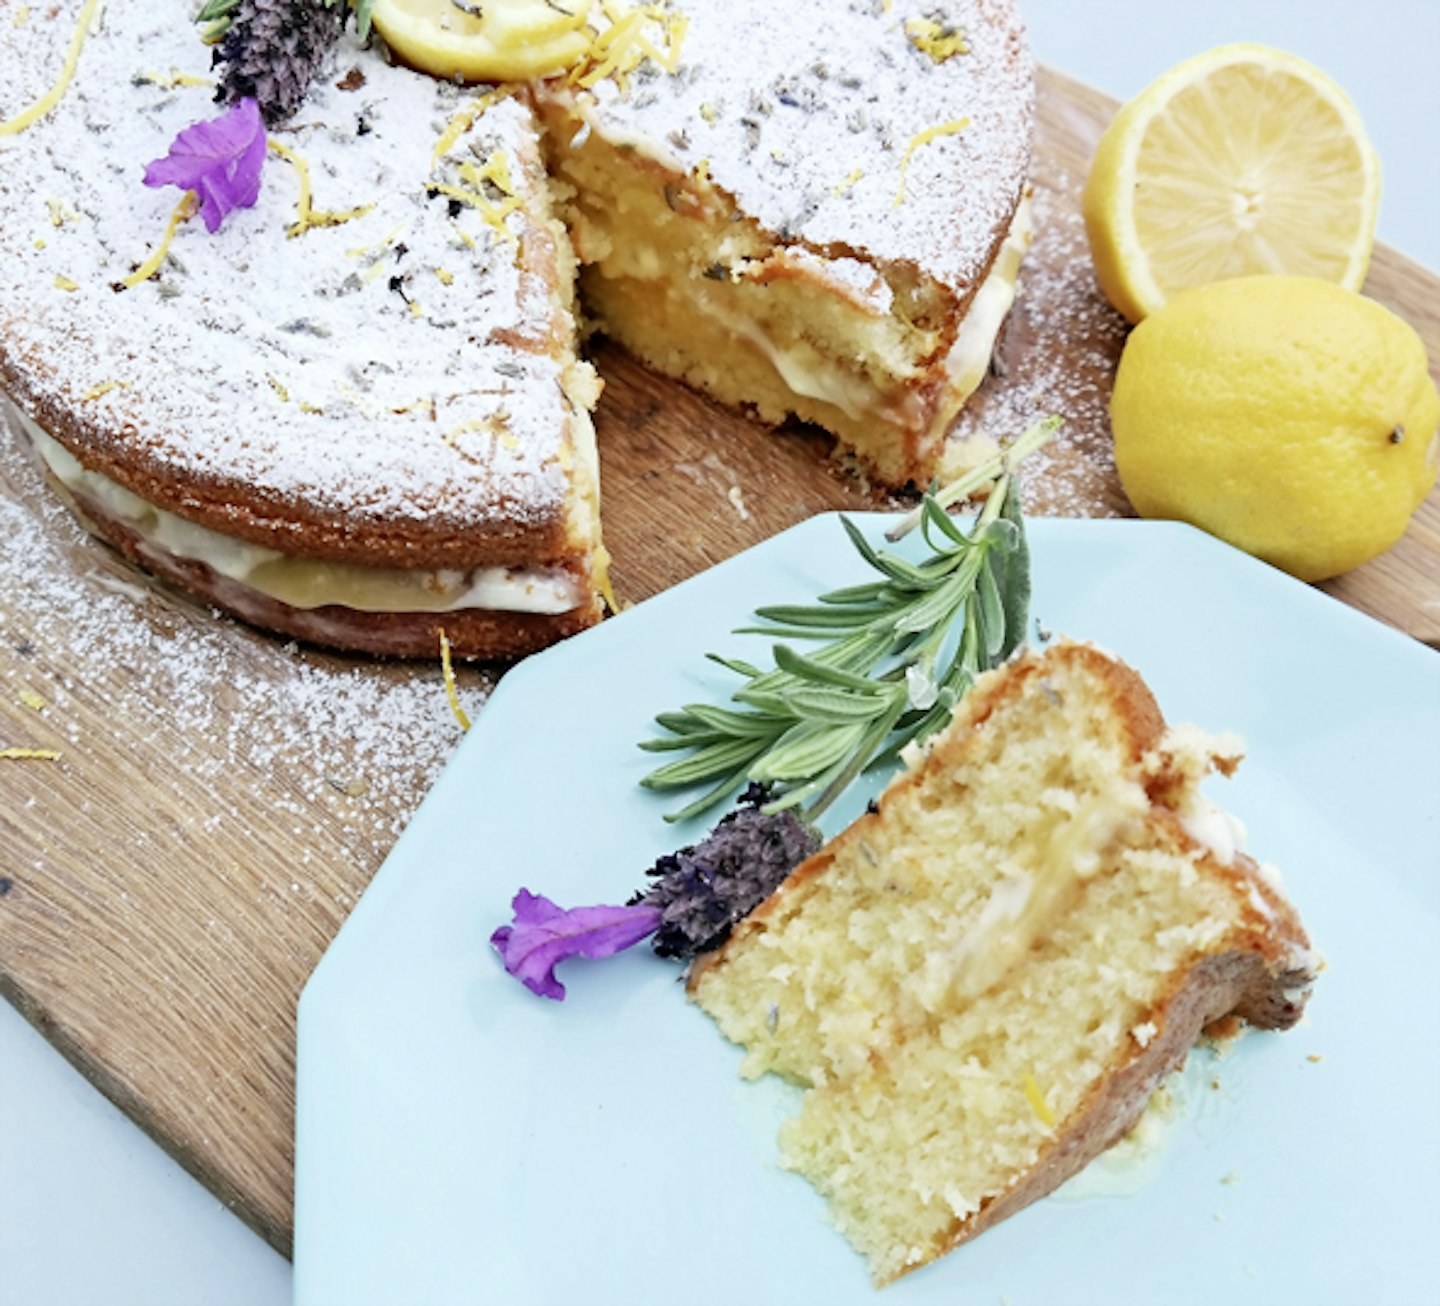 How To Make A Lavender Topped Cake